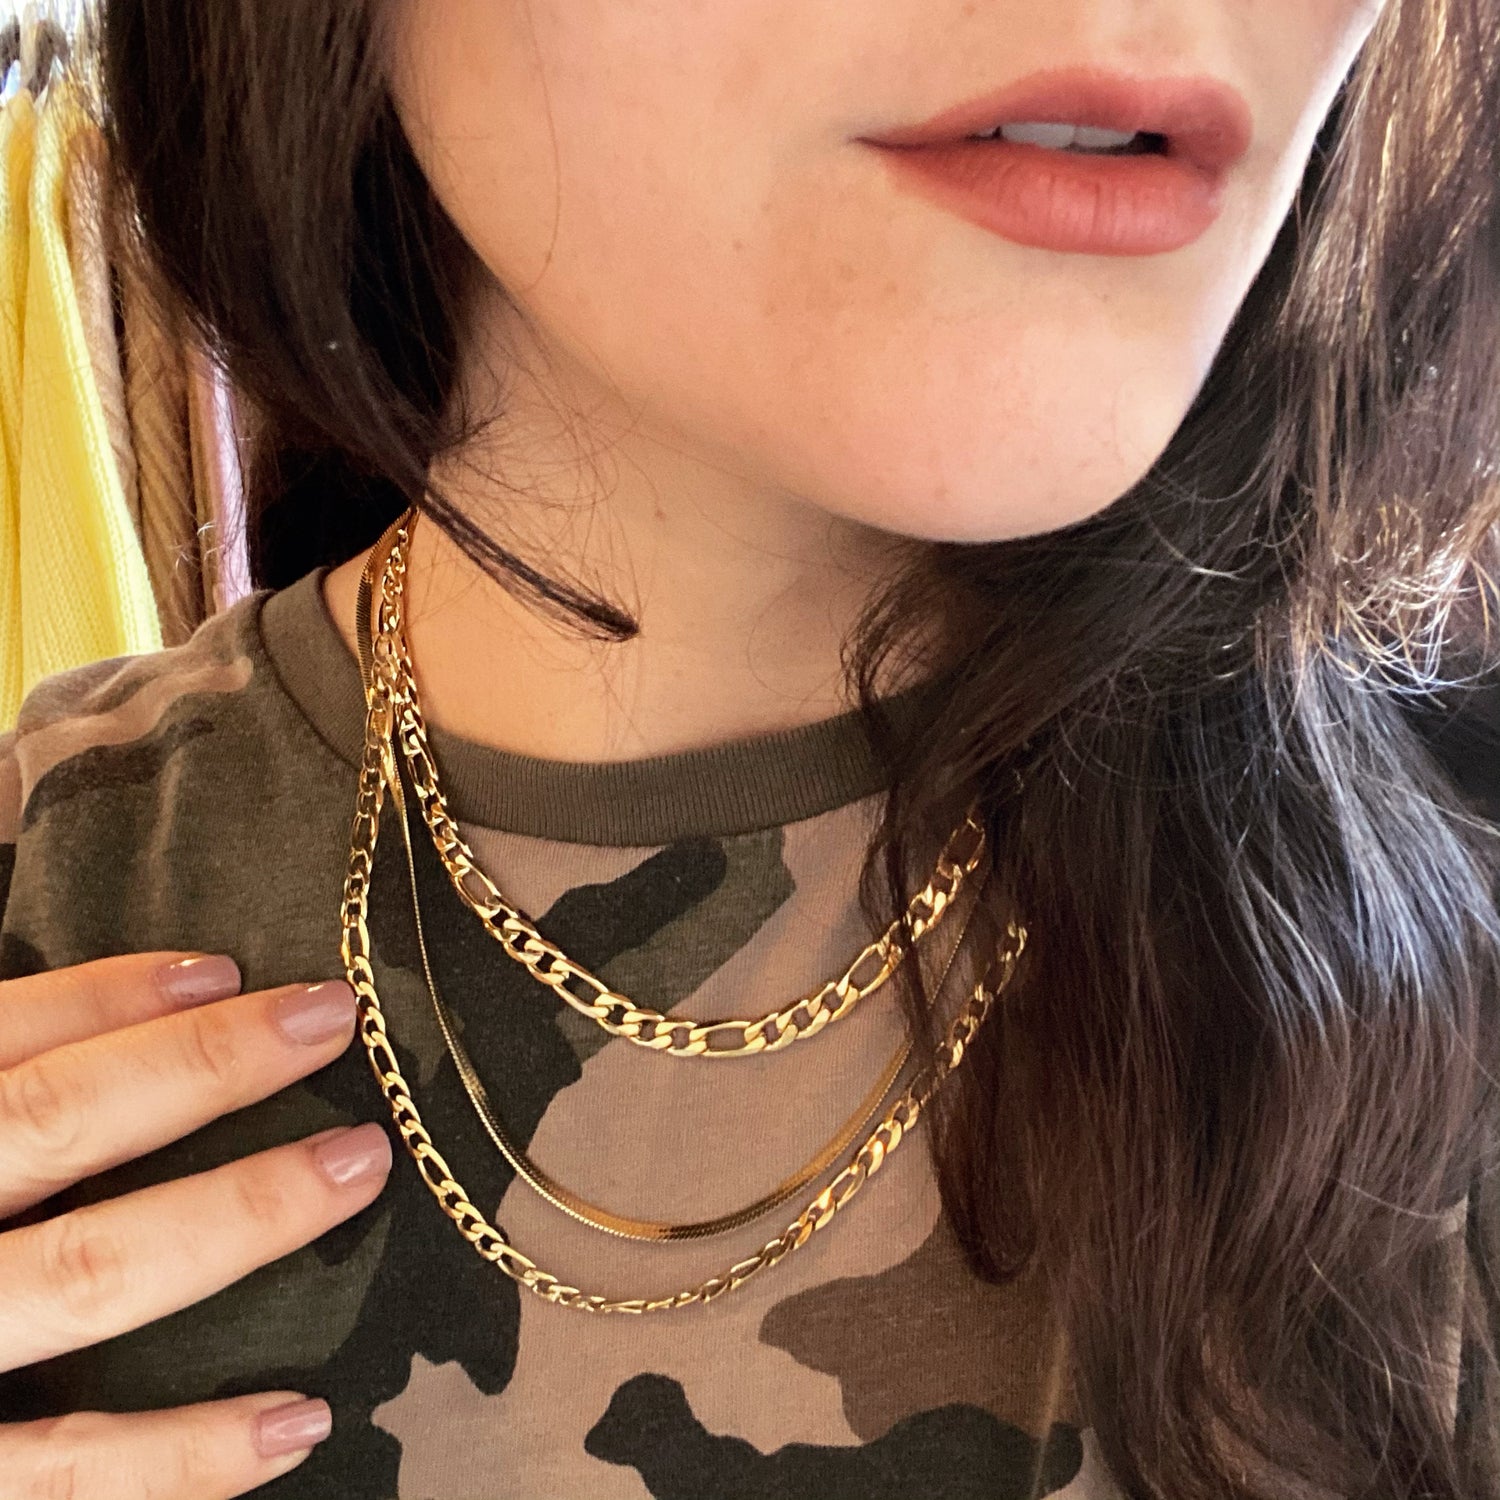 Thin snake chain necklace